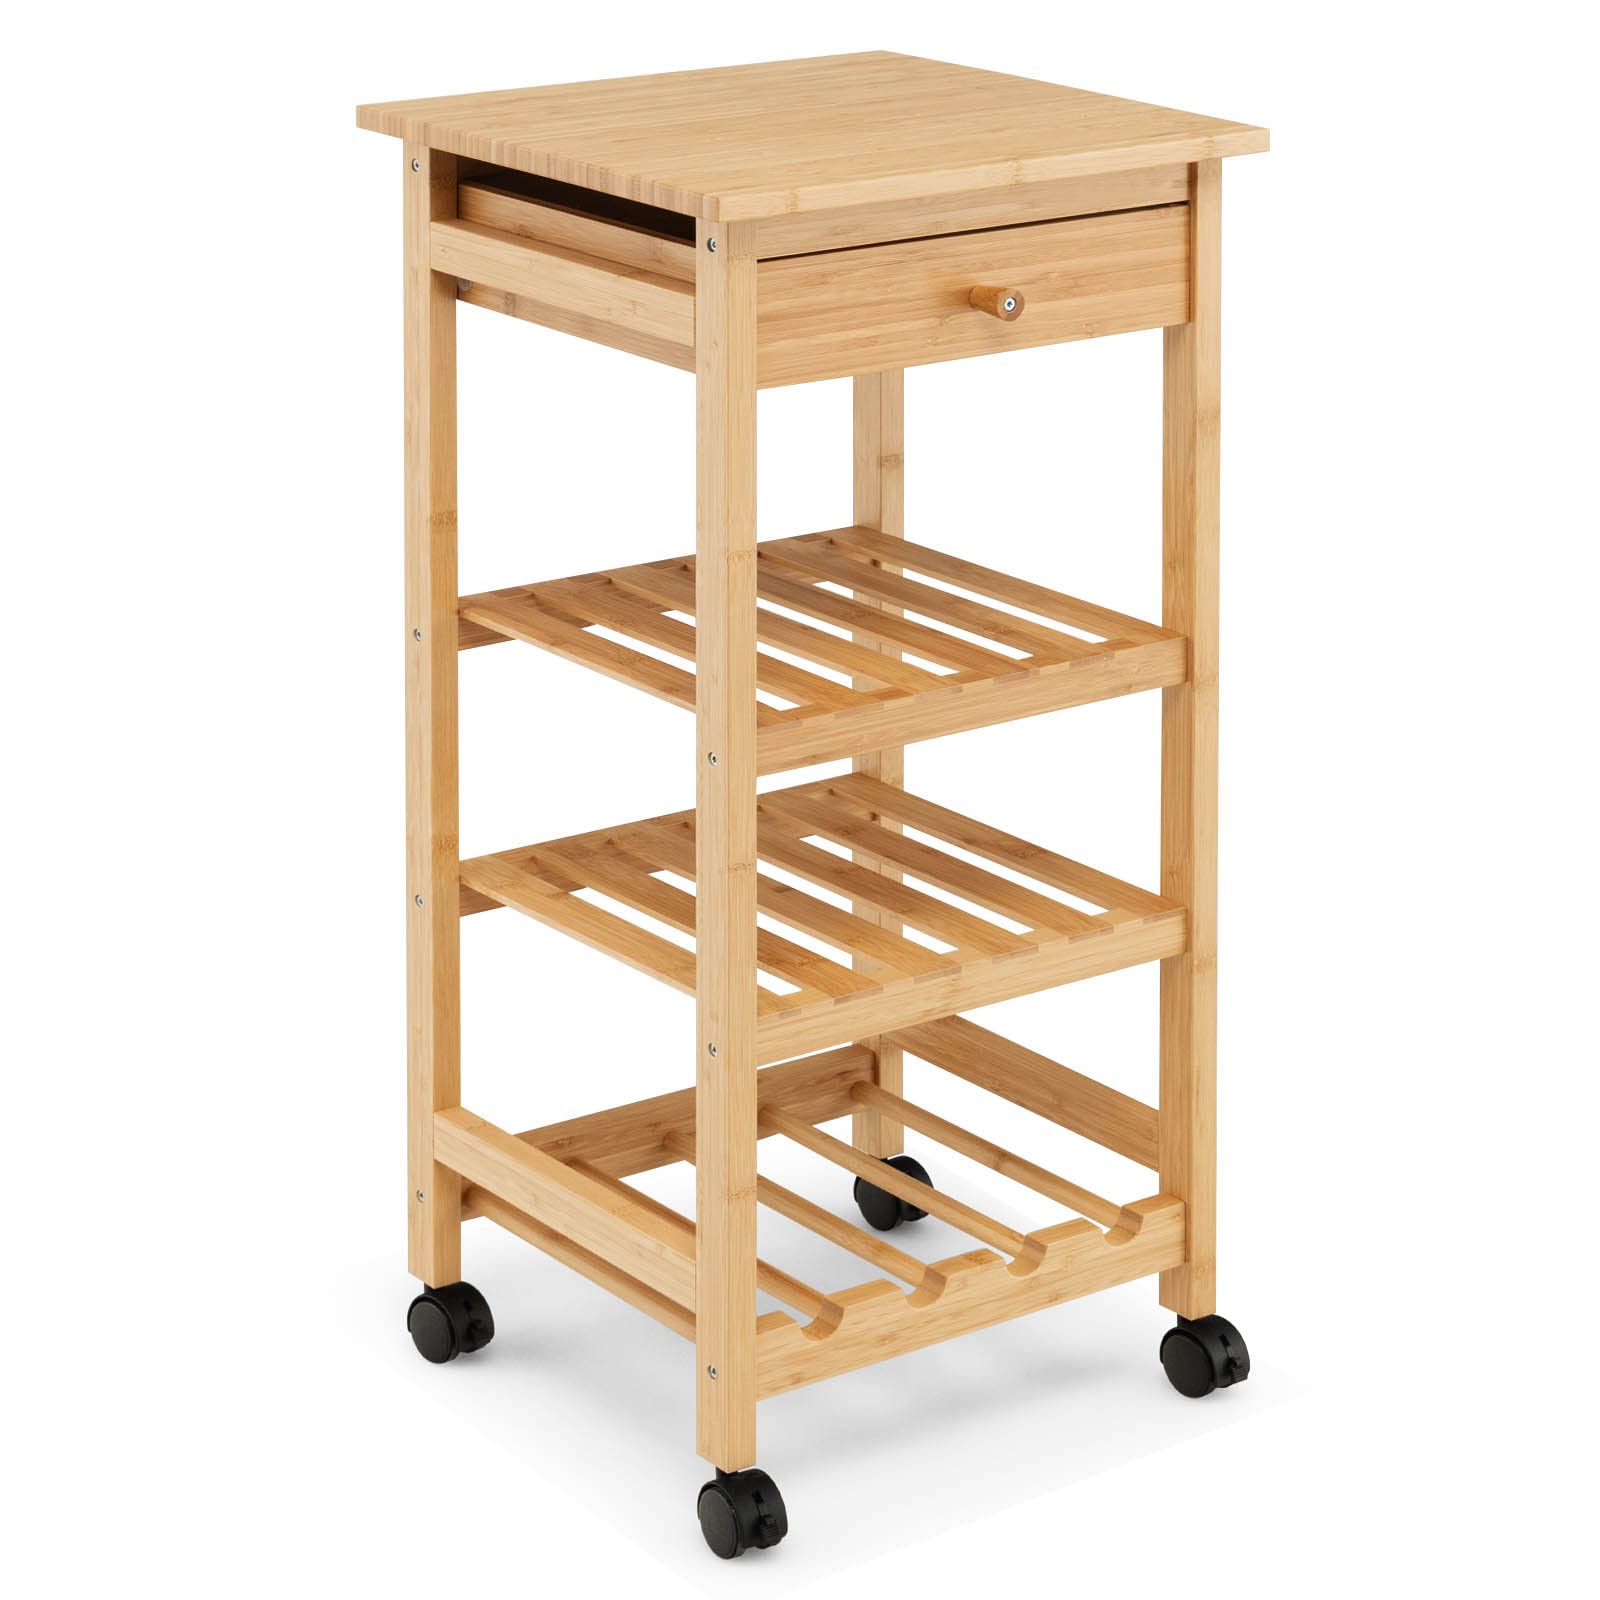 Giantex Kitchen Island on Wheels, Rolling Bamboo Kitchen Trolley with Drawer, 2 Open Storage Shelves, Wine Rack, 4 Lockable Casters